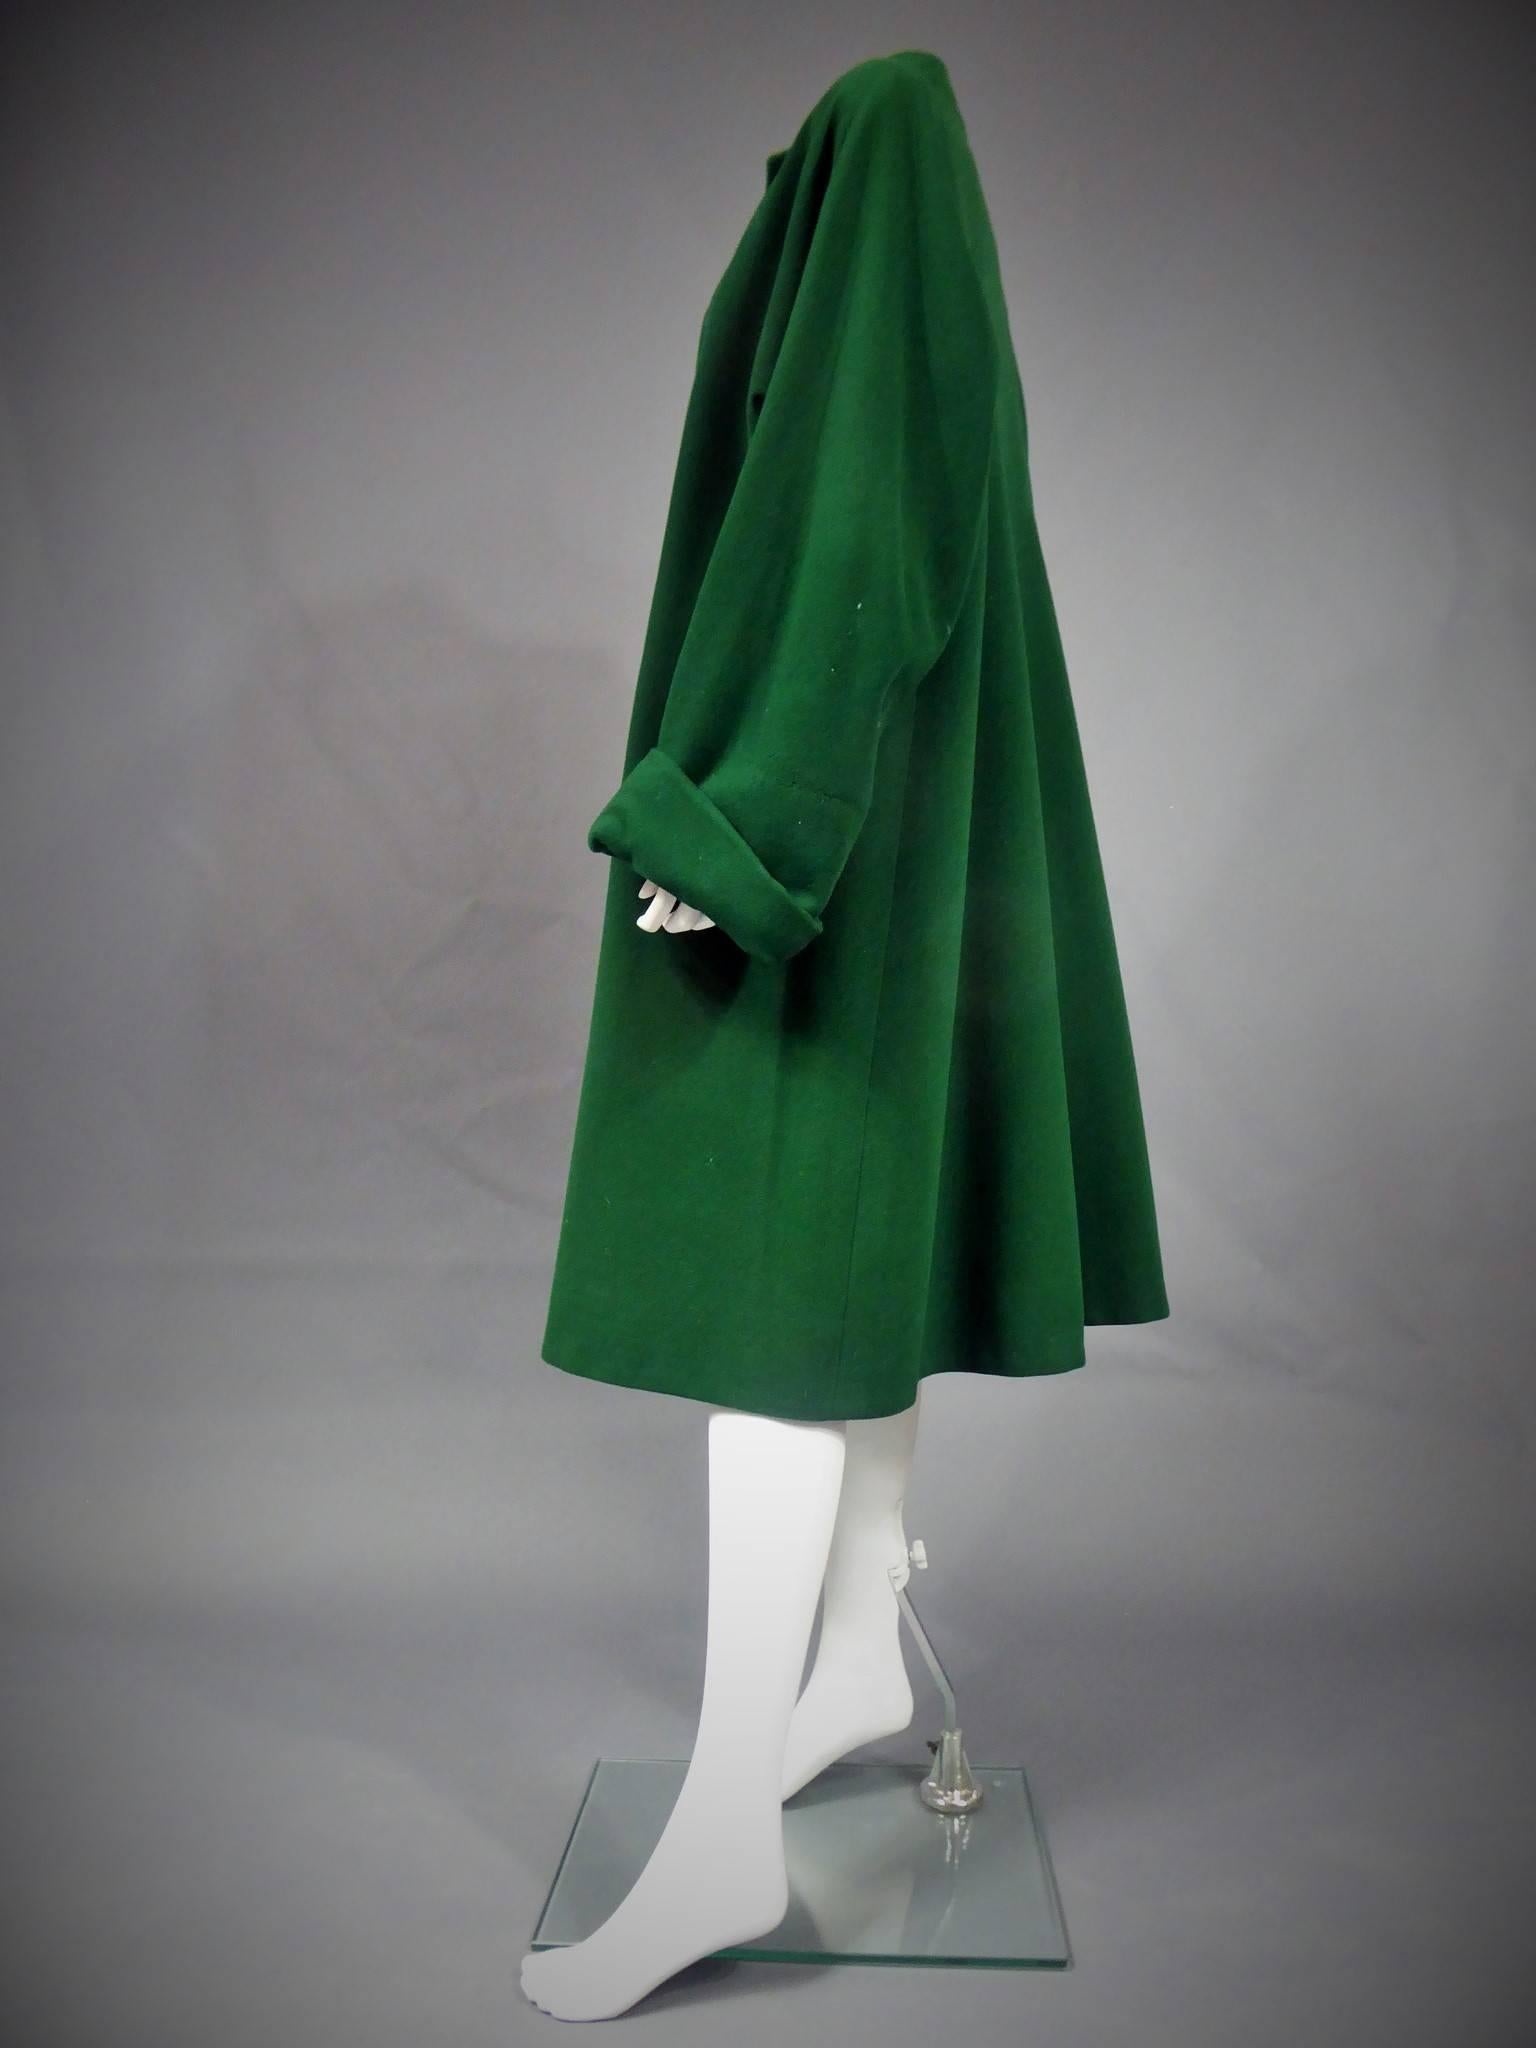 Circa 1955/1965
Paris, France 
Large coat in thick felt green wool by Bruyère. Large sleeves 3/4 raglan wide lapel, large trapeze shape. Two pockets on the sides. Black lining in silk taffeta. Back, detail of panels returning to the shoulders. Black